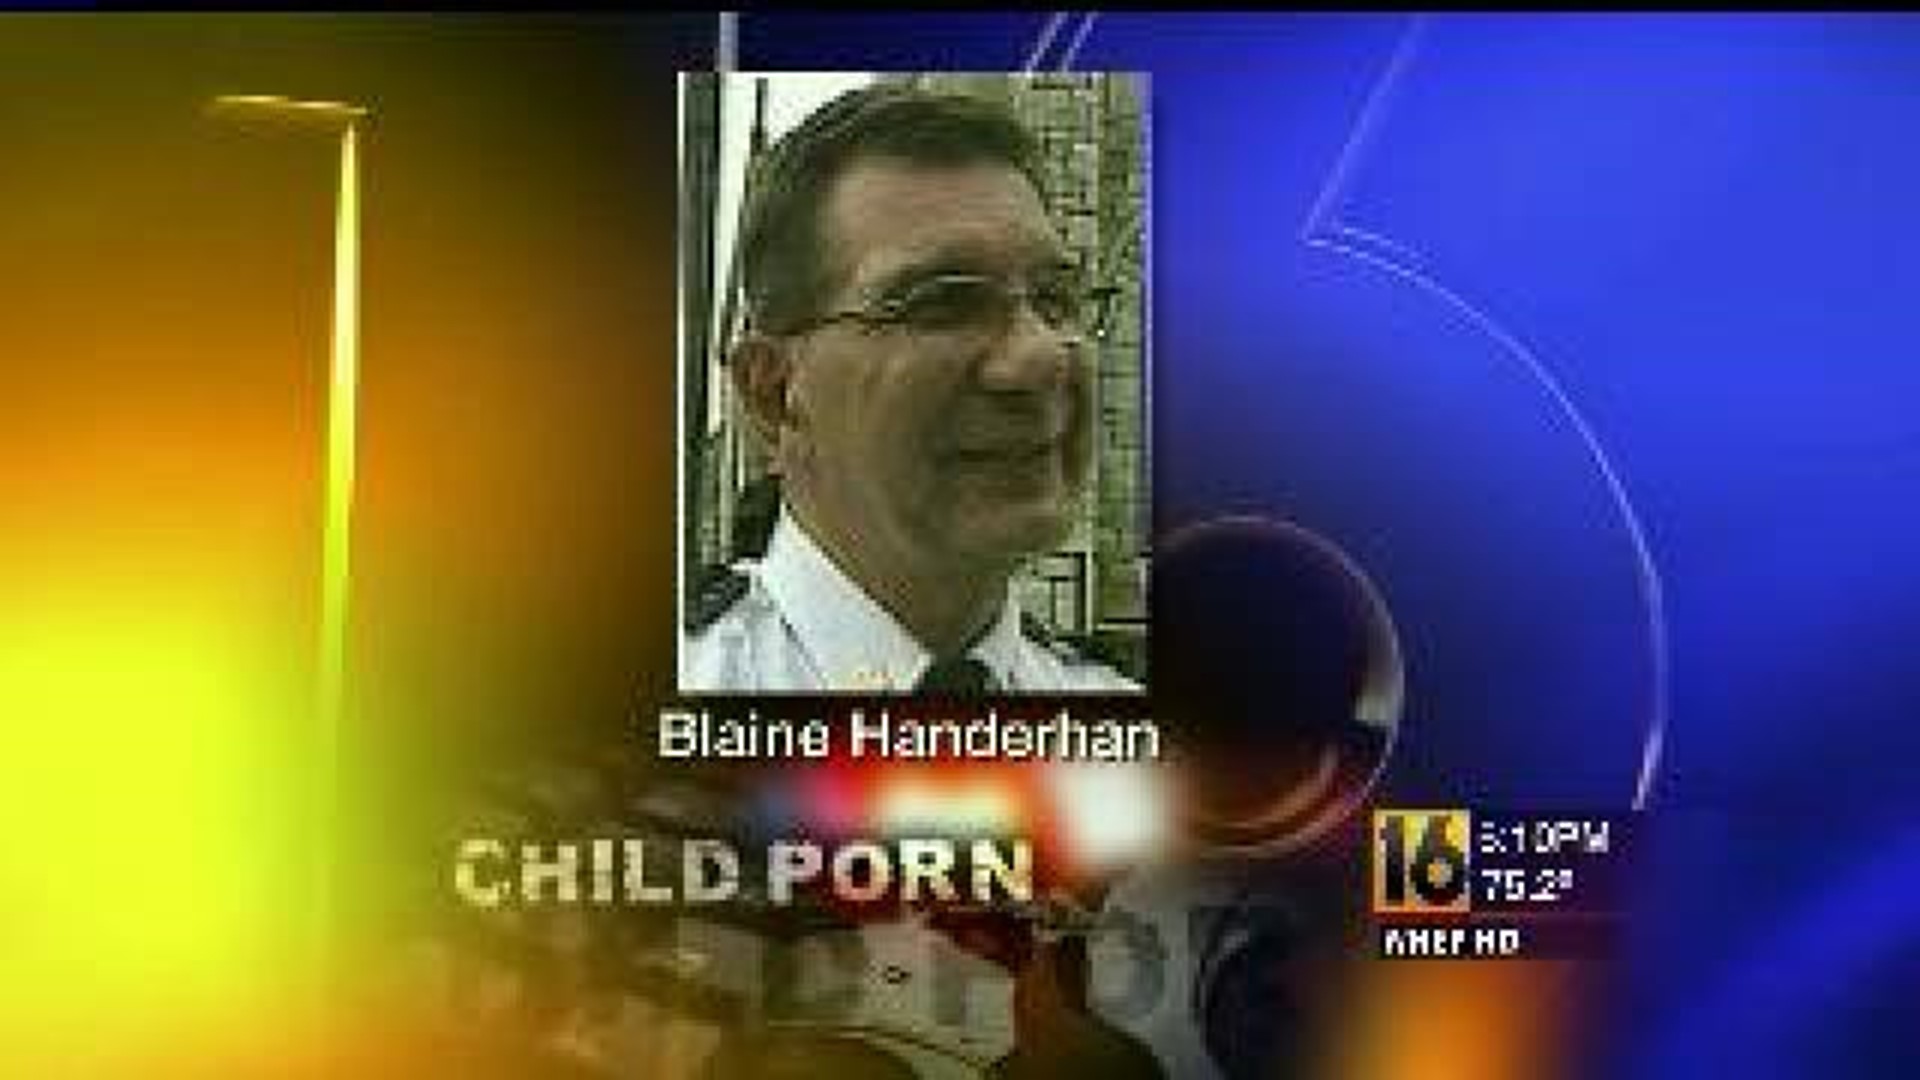 Ex-Officer Sentenced on Child Porn Charges